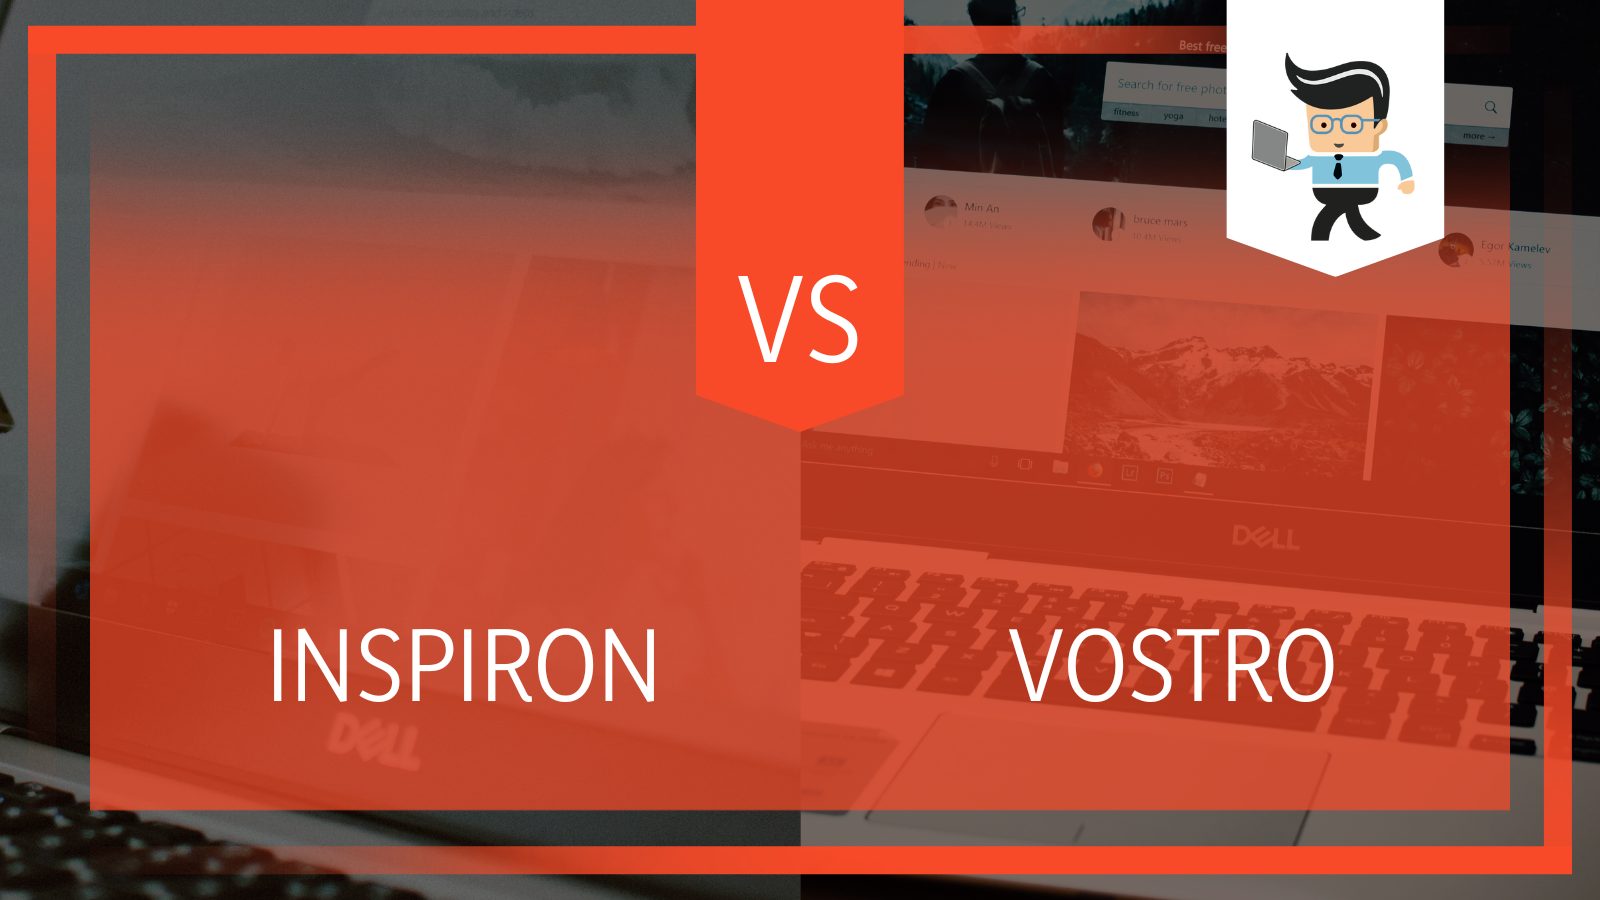 Inspiron vs Vostro Performance Difference